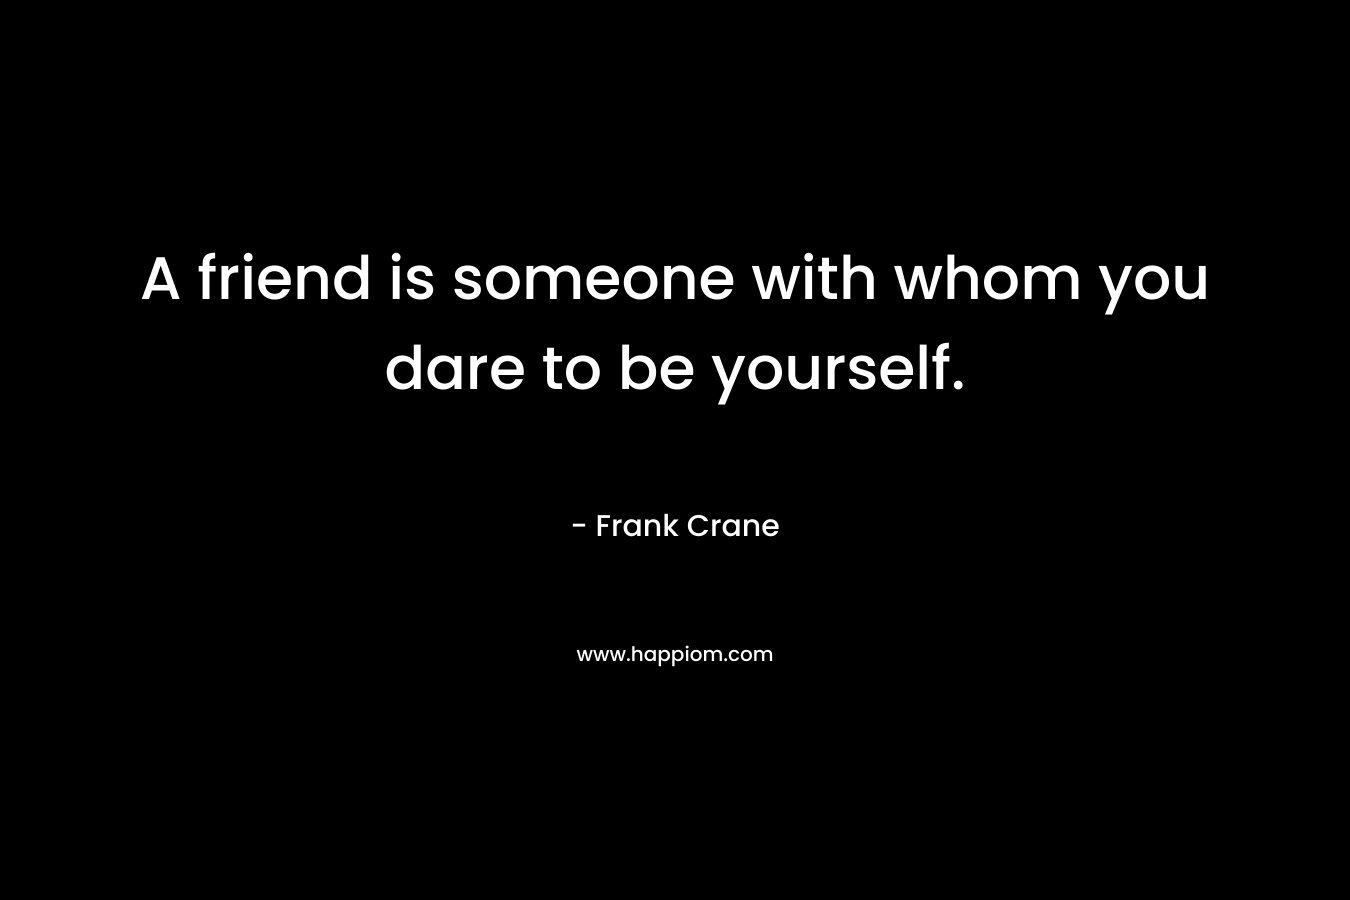 A friend is someone with whom you dare to be yourself. – Frank Crane